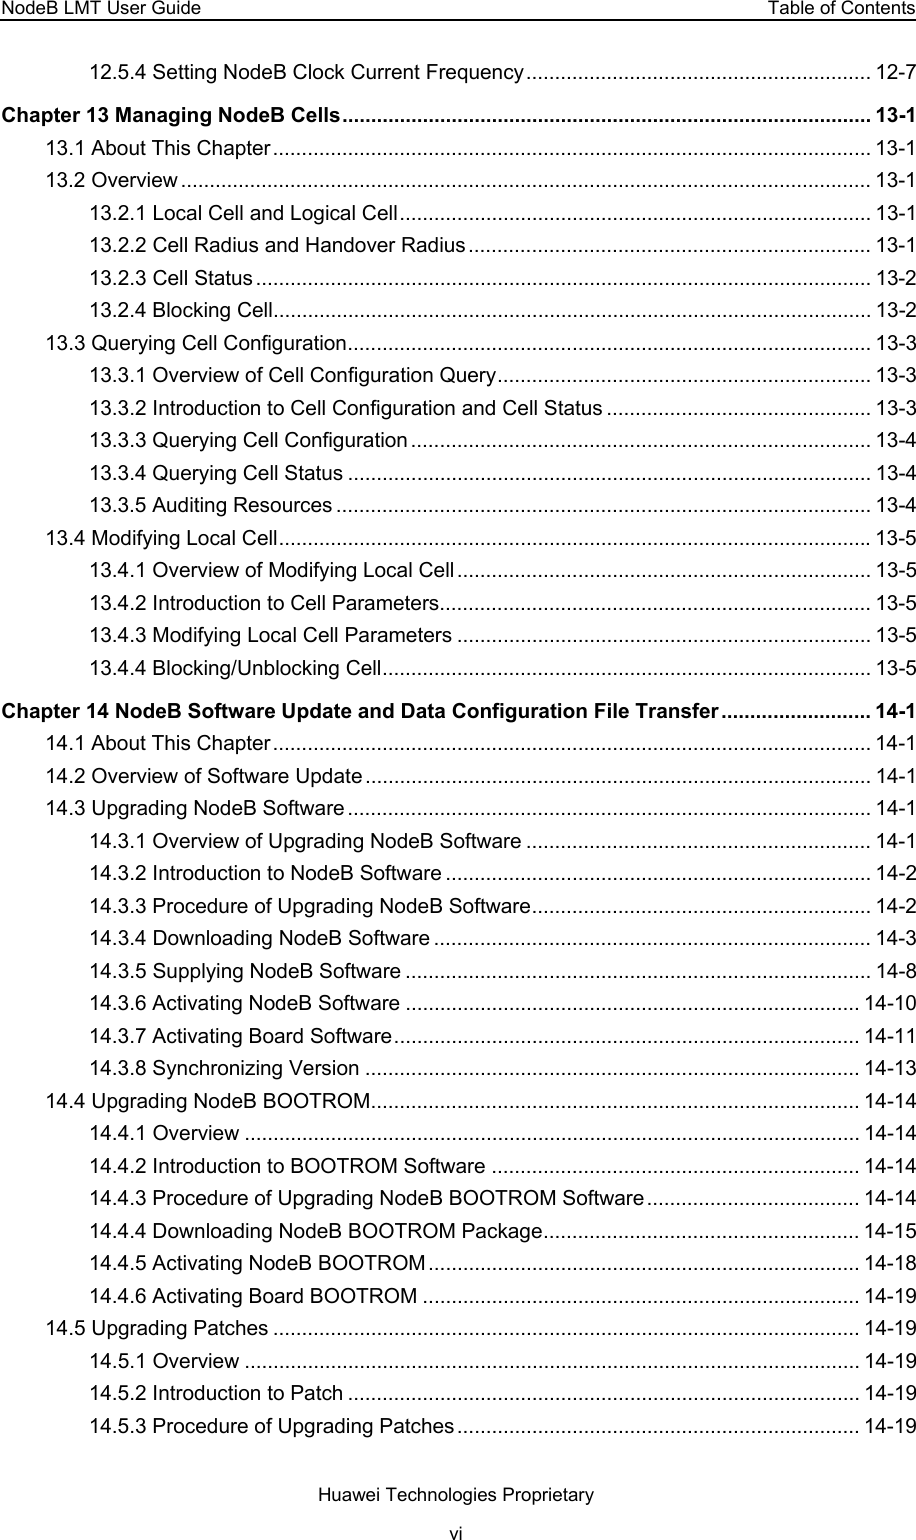 NodeB LMT User Guide  Table of Contents 12.5.4 Setting NodeB Clock Current Frequency............................................................ 12-7 Chapter 13 Managing NodeB Cells............................................................................................ 13-1 13.1 About This Chapter........................................................................................................ 13-1 13.2 Overview ........................................................................................................................ 13-1 13.2.1 Local Cell and Logical Cell.................................................................................. 13-1 13.2.2 Cell Radius and Handover Radius...................................................................... 13-1 13.2.3 Cell Status ........................................................................................................... 13-2 13.2.4 Blocking Cell........................................................................................................ 13-2 13.3 Querying Cell Configuration........................................................................................... 13-3 13.3.1 Overview of Cell Configuration Query................................................................. 13-3 13.3.2 Introduction to Cell Configuration and Cell Status .............................................. 13-3 13.3.3 Querying Cell Configuration ................................................................................ 13-4 13.3.4 Querying Cell Status ........................................................................................... 13-4 13.3.5 Auditing Resources ............................................................................................. 13-4 13.4 Modifying Local Cell....................................................................................................... 13-5 13.4.1 Overview of Modifying Local Cell ........................................................................ 13-5 13.4.2 Introduction to Cell Parameters........................................................................... 13-5 13.4.3 Modifying Local Cell Parameters ........................................................................ 13-5 13.4.4 Blocking/Unblocking Cell..................................................................................... 13-5 Chapter 14 NodeB Software Update and Data Configuration File Transfer .......................... 14-1 14.1 About This Chapter........................................................................................................ 14-1 14.2 Overview of Software Update ........................................................................................ 14-1 14.3 Upgrading NodeB Software ........................................................................................... 14-1 14.3.1 Overview of Upgrading NodeB Software ............................................................ 14-1 14.3.2 Introduction to NodeB Software .......................................................................... 14-2 14.3.3 Procedure of Upgrading NodeB Software........................................................... 14-2 14.3.4 Downloading NodeB Software ............................................................................ 14-3 14.3.5 Supplying NodeB Software ................................................................................. 14-8 14.3.6 Activating NodeB Software ............................................................................... 14-10 14.3.7 Activating Board Software................................................................................. 14-11 14.3.8 Synchronizing Version ...................................................................................... 14-13 14.4 Upgrading NodeB BOOTROM..................................................................................... 14-14 14.4.1 Overview ........................................................................................................... 14-14 14.4.2 Introduction to BOOTROM Software ................................................................ 14-14 14.4.3 Procedure of Upgrading NodeB BOOTROM Software..................................... 14-14 14.4.4 Downloading NodeB BOOTROM Package....................................................... 14-15 14.4.5 Activating NodeB BOOTROM........................................................................... 14-18 14.4.6 Activating Board BOOTROM ............................................................................ 14-19 14.5 Upgrading Patches ...................................................................................................... 14-19 14.5.1 Overview ........................................................................................................... 14-19 14.5.2 Introduction to Patch ......................................................................................... 14-19 14.5.3 Procedure of Upgrading Patches ...................................................................... 14-19 Huawei Technologies Proprietary vi 